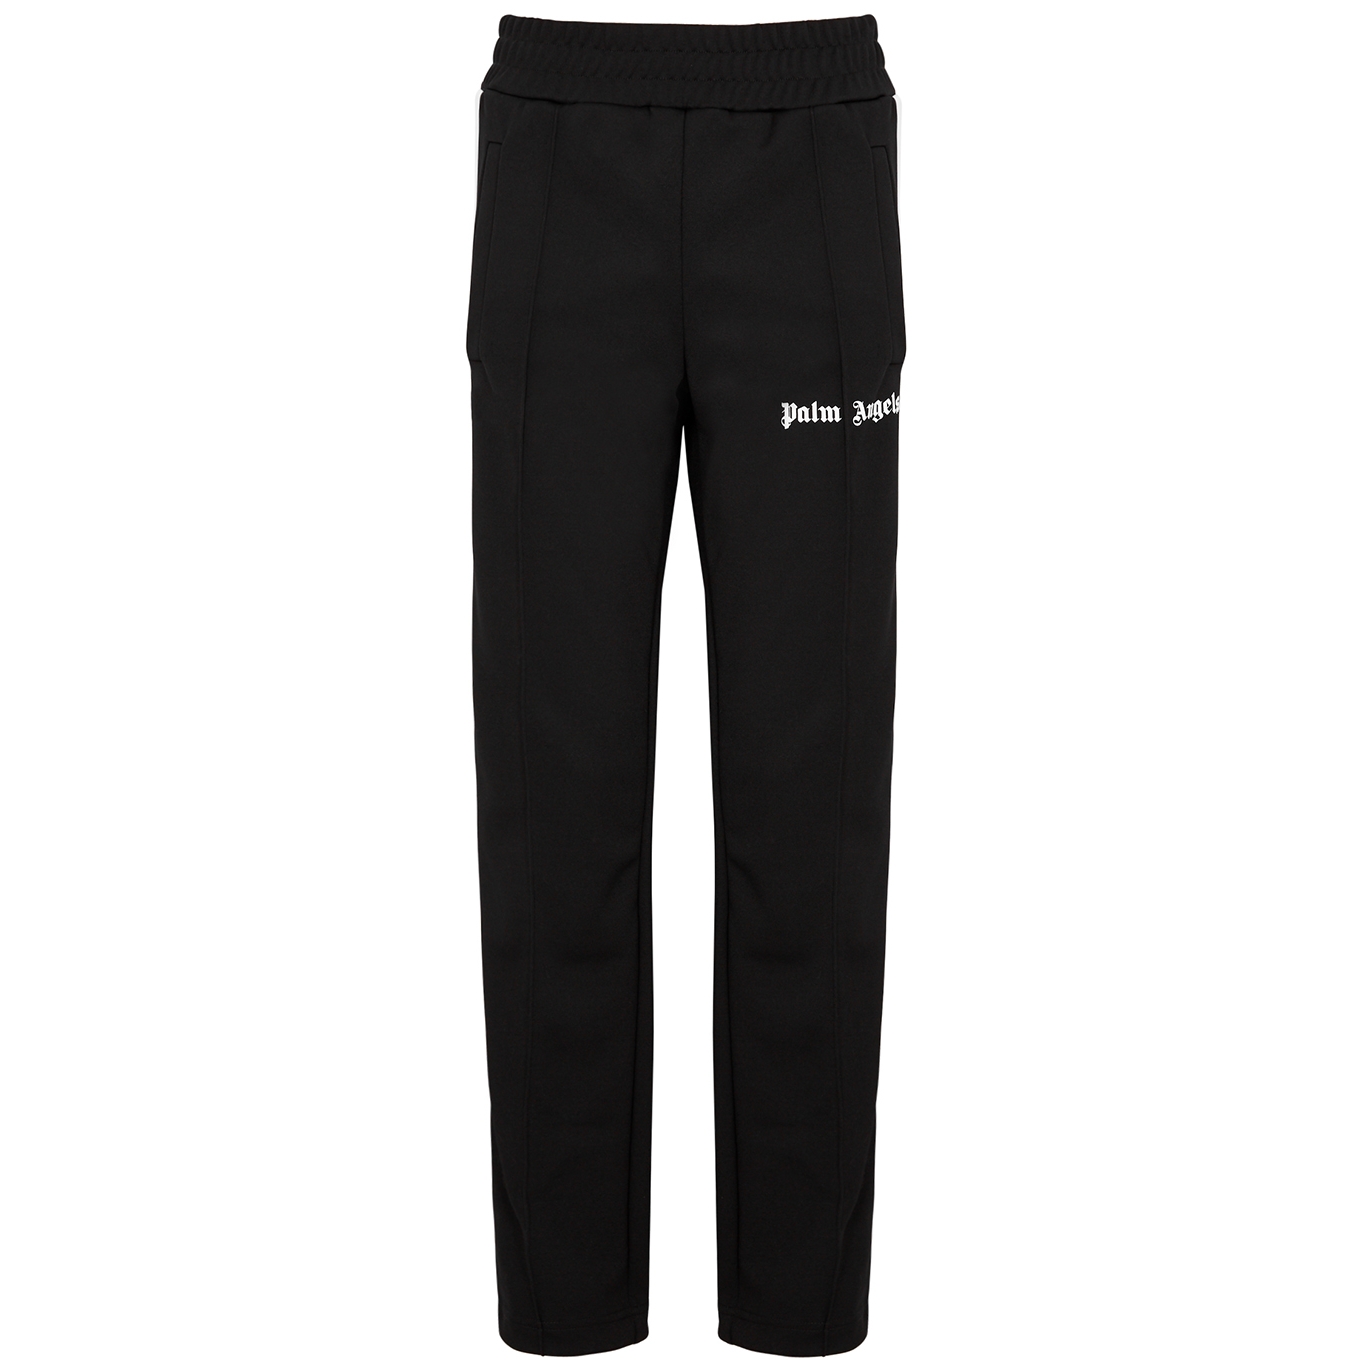 Palm Angels Black Jersey Track Pants - Black And White - M